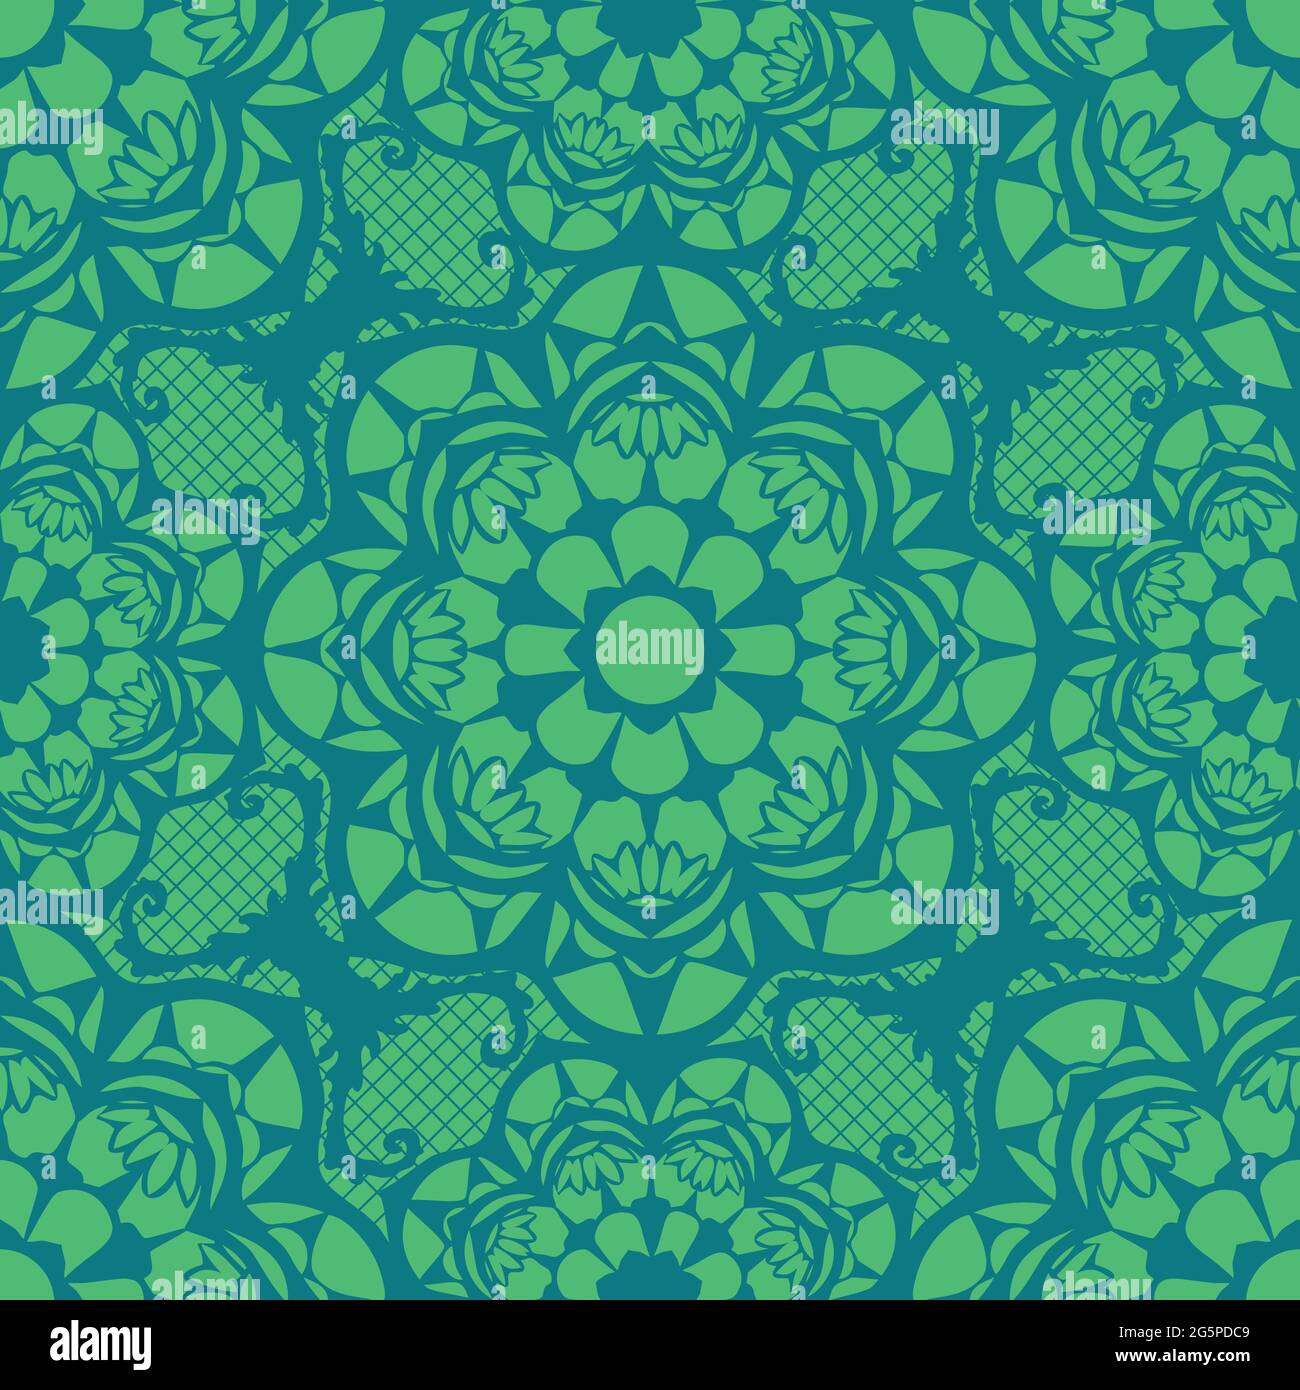 Seamless vector pattern with lace texture on green background. Romantic embroidery wallpaper design. Bright blue mesh fashion textile. Stock Vector